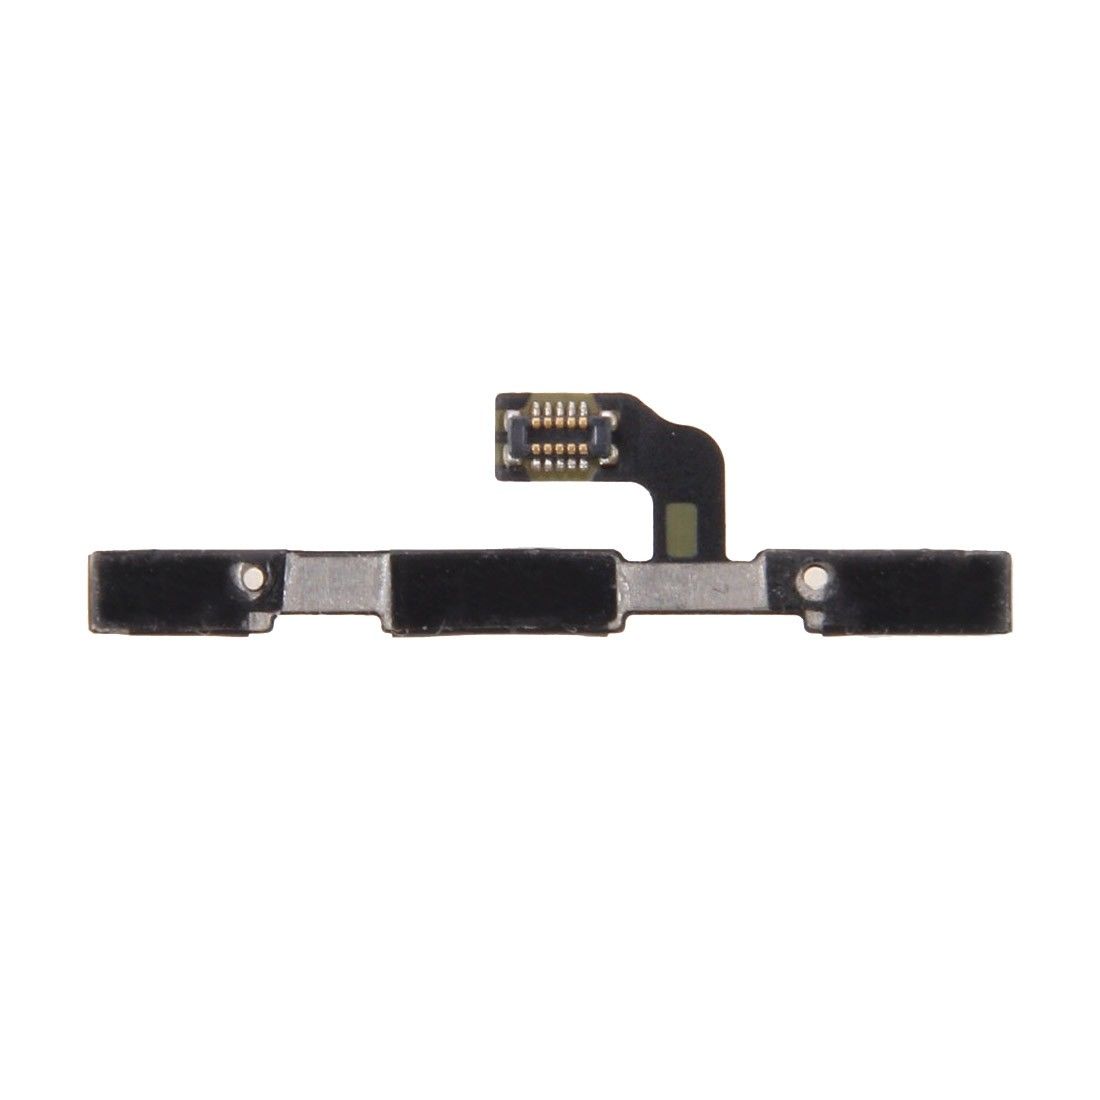 Huawei P8 Replacement Volume & Power On/Off Buttons Flex Cable for [product_price] - First Help Tech